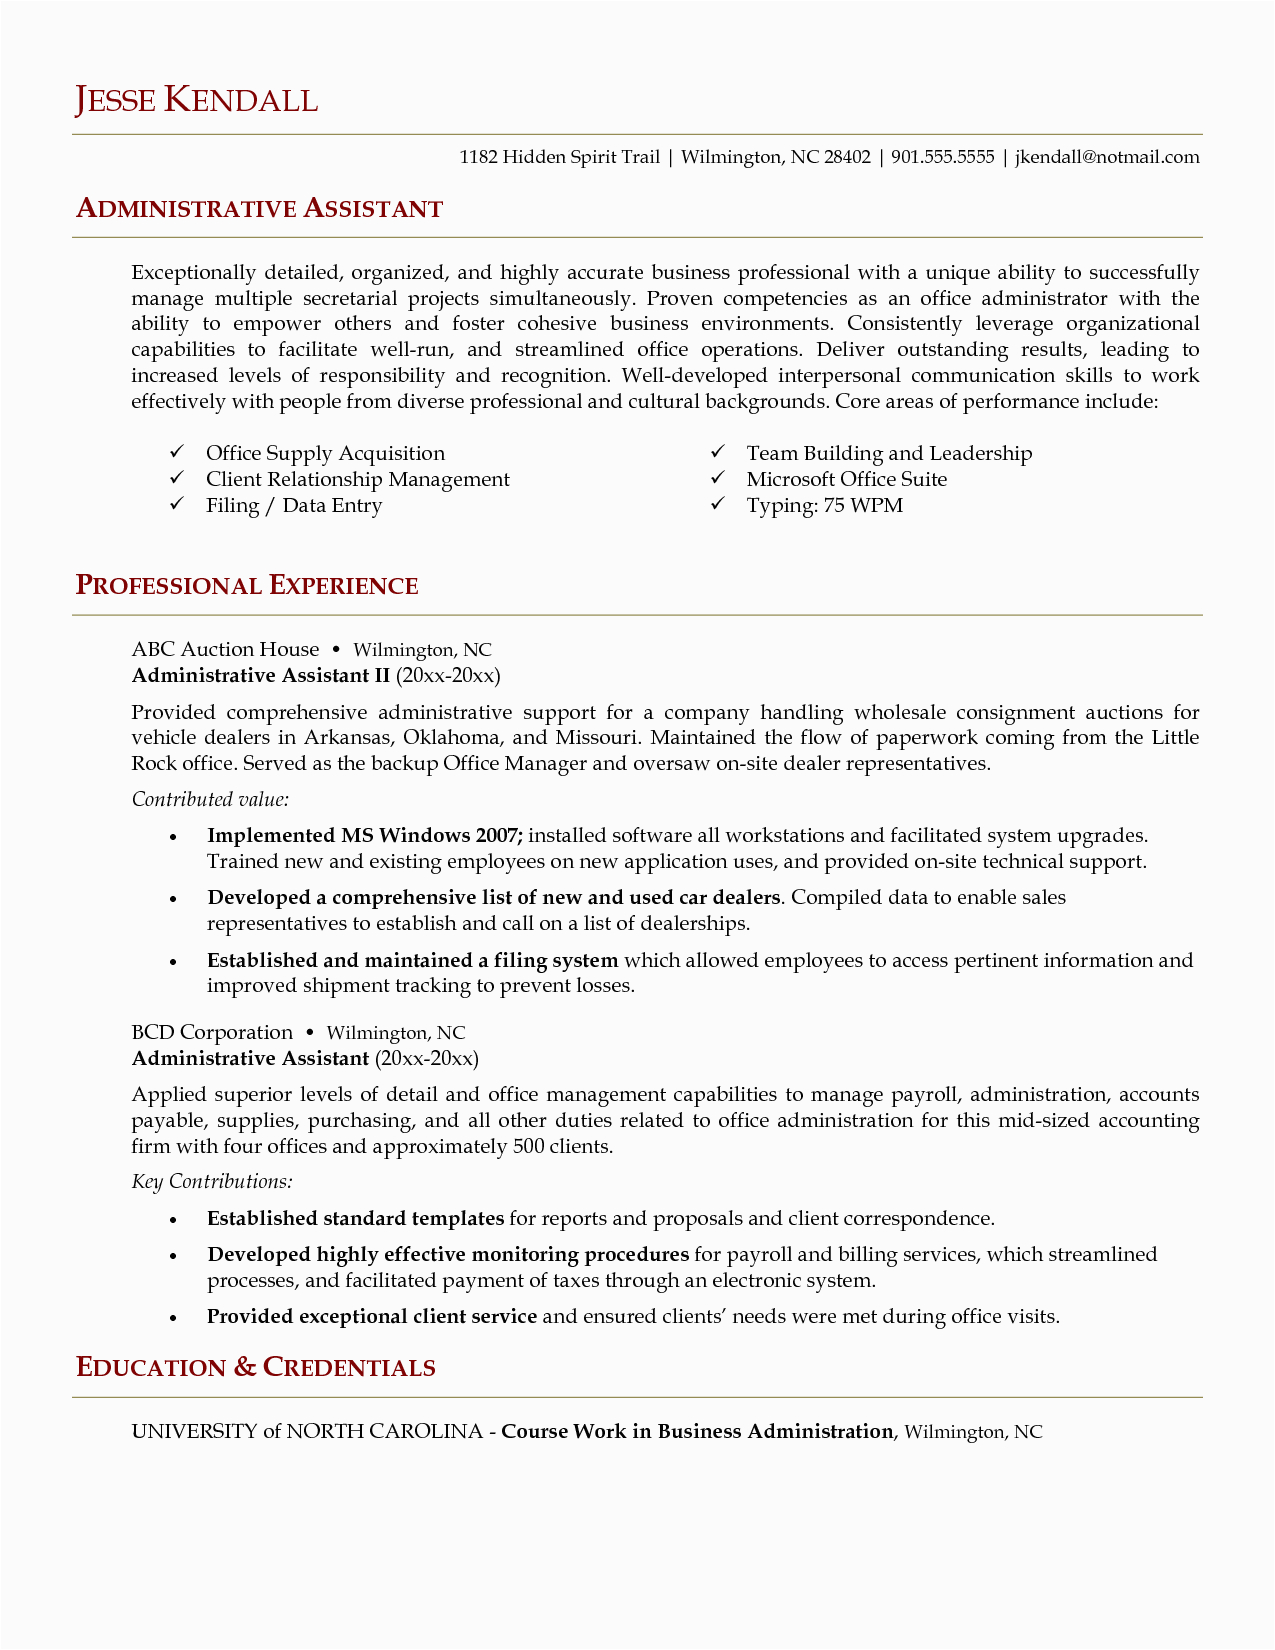 Samples Of Resume Objectives for Administrative assistants In the event that You are Applying for An Administrative